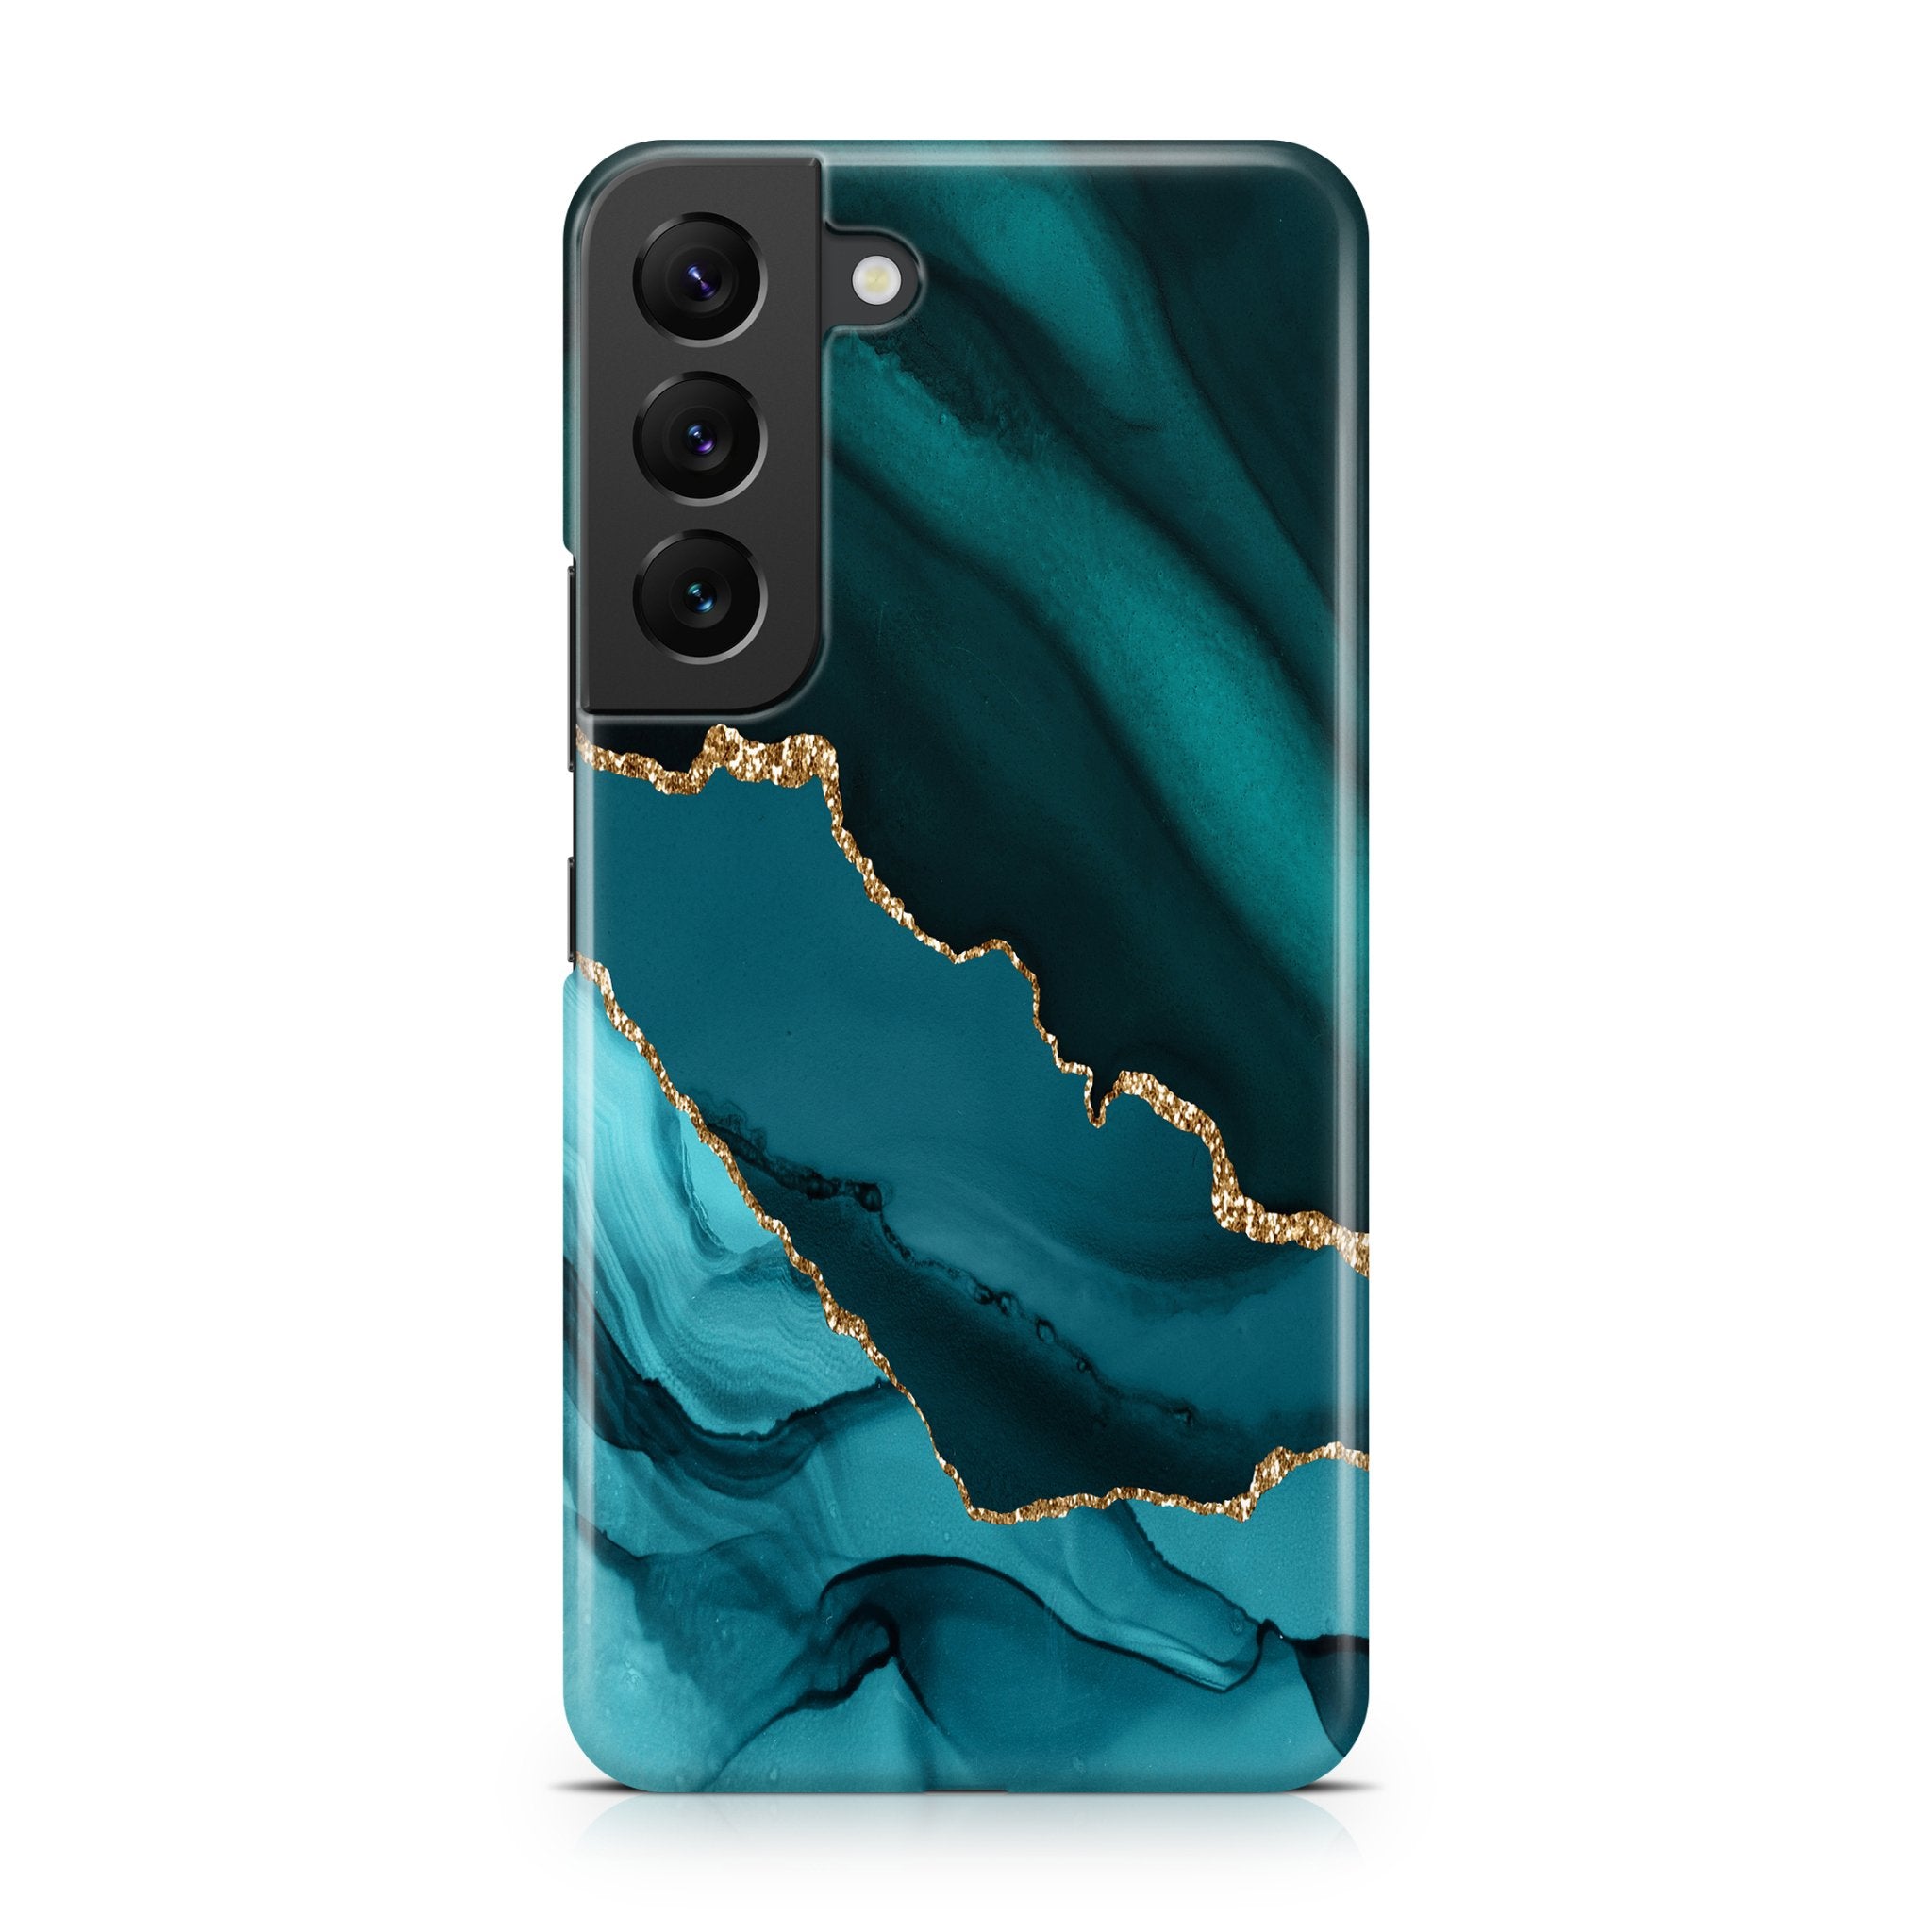 Teal Elegance I - Samsung phone case designs by CaseSwagger